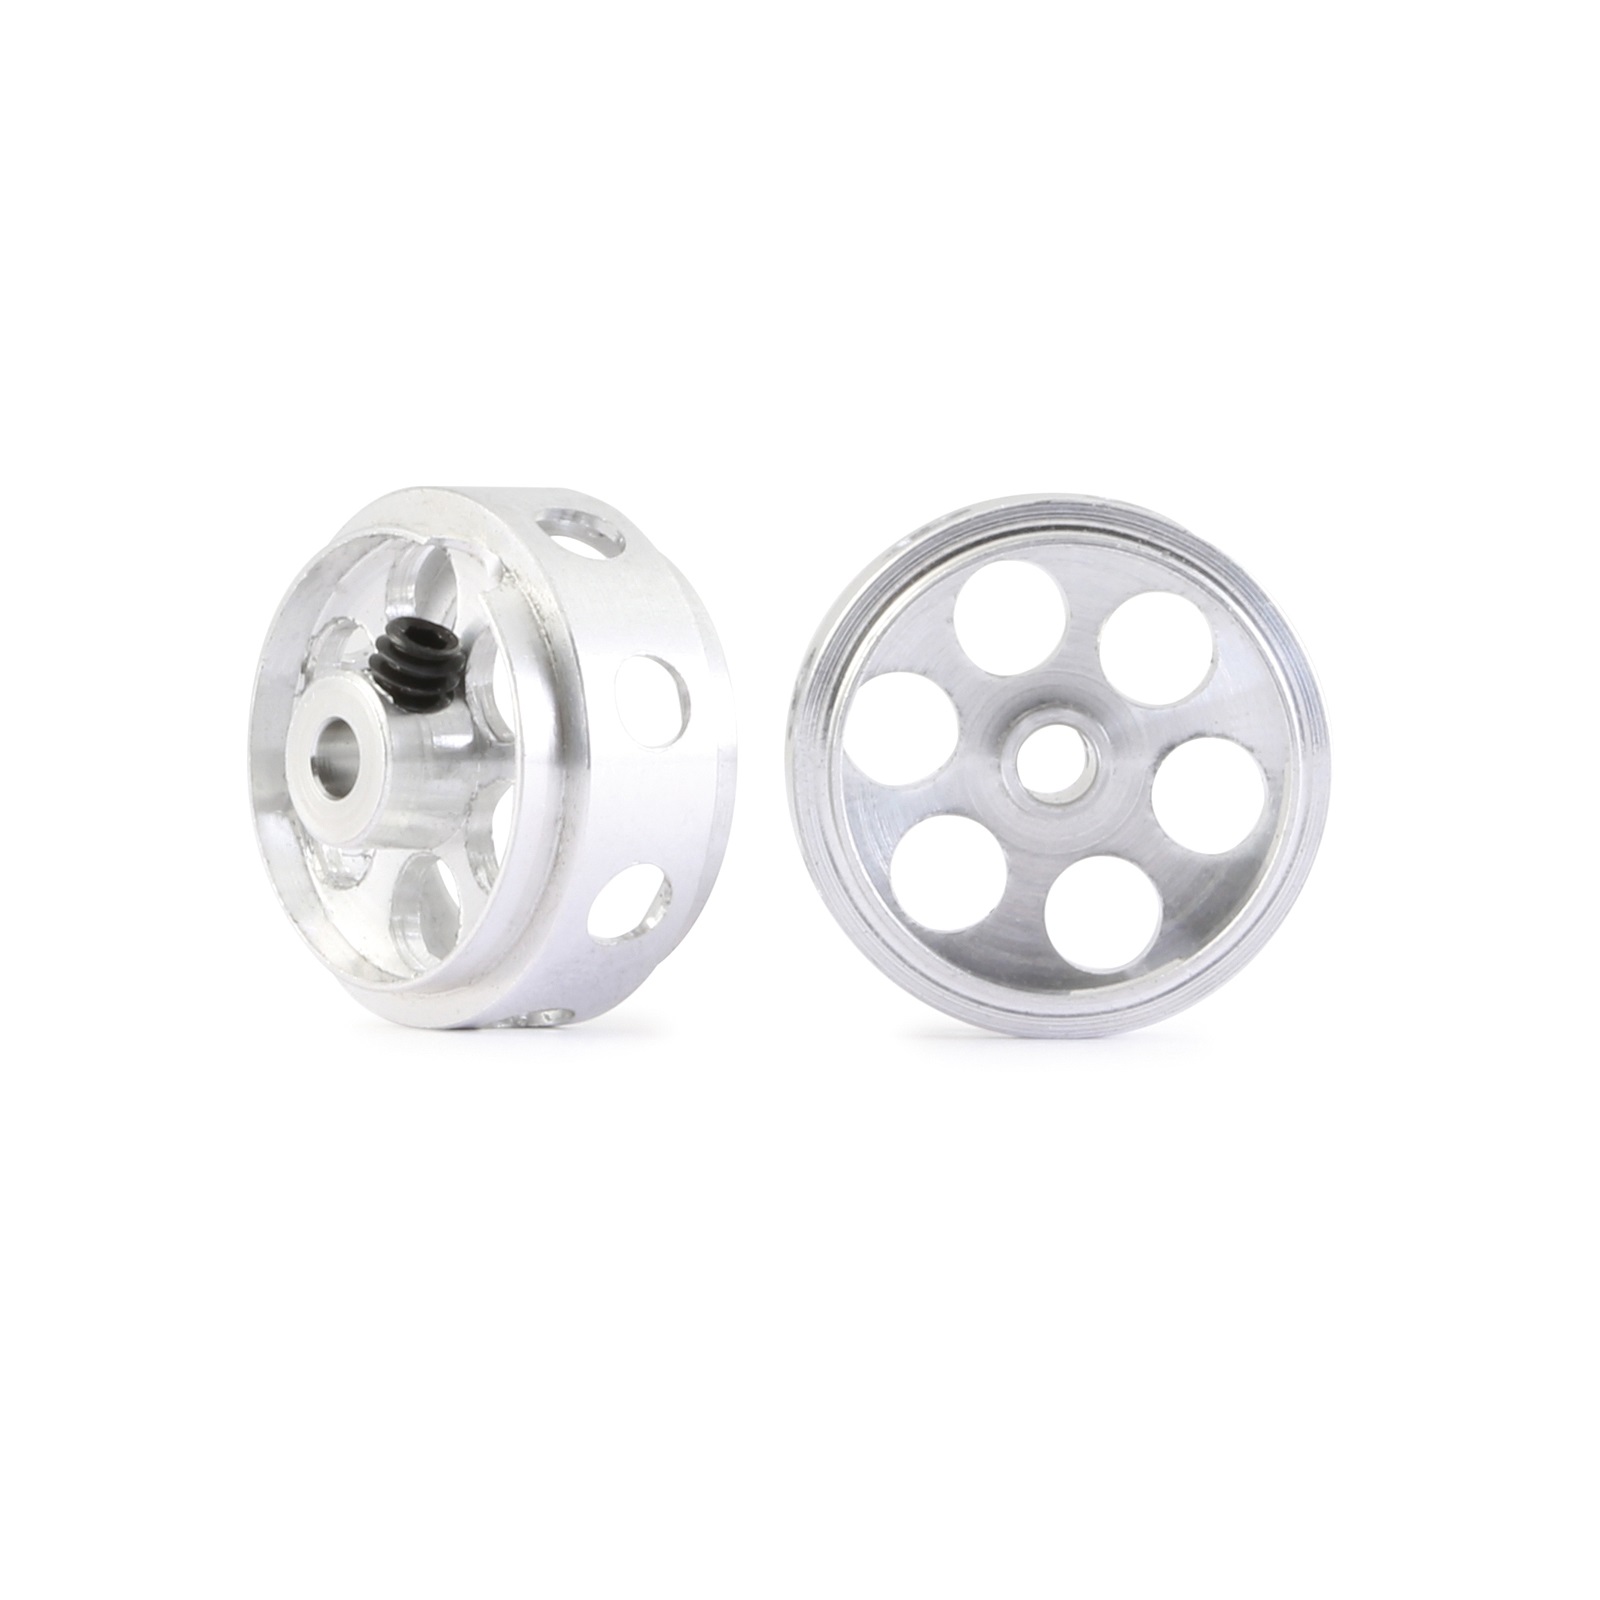 Aluminium Front Wheels No-Air System drilled 16.5 x 8.5 mm axle